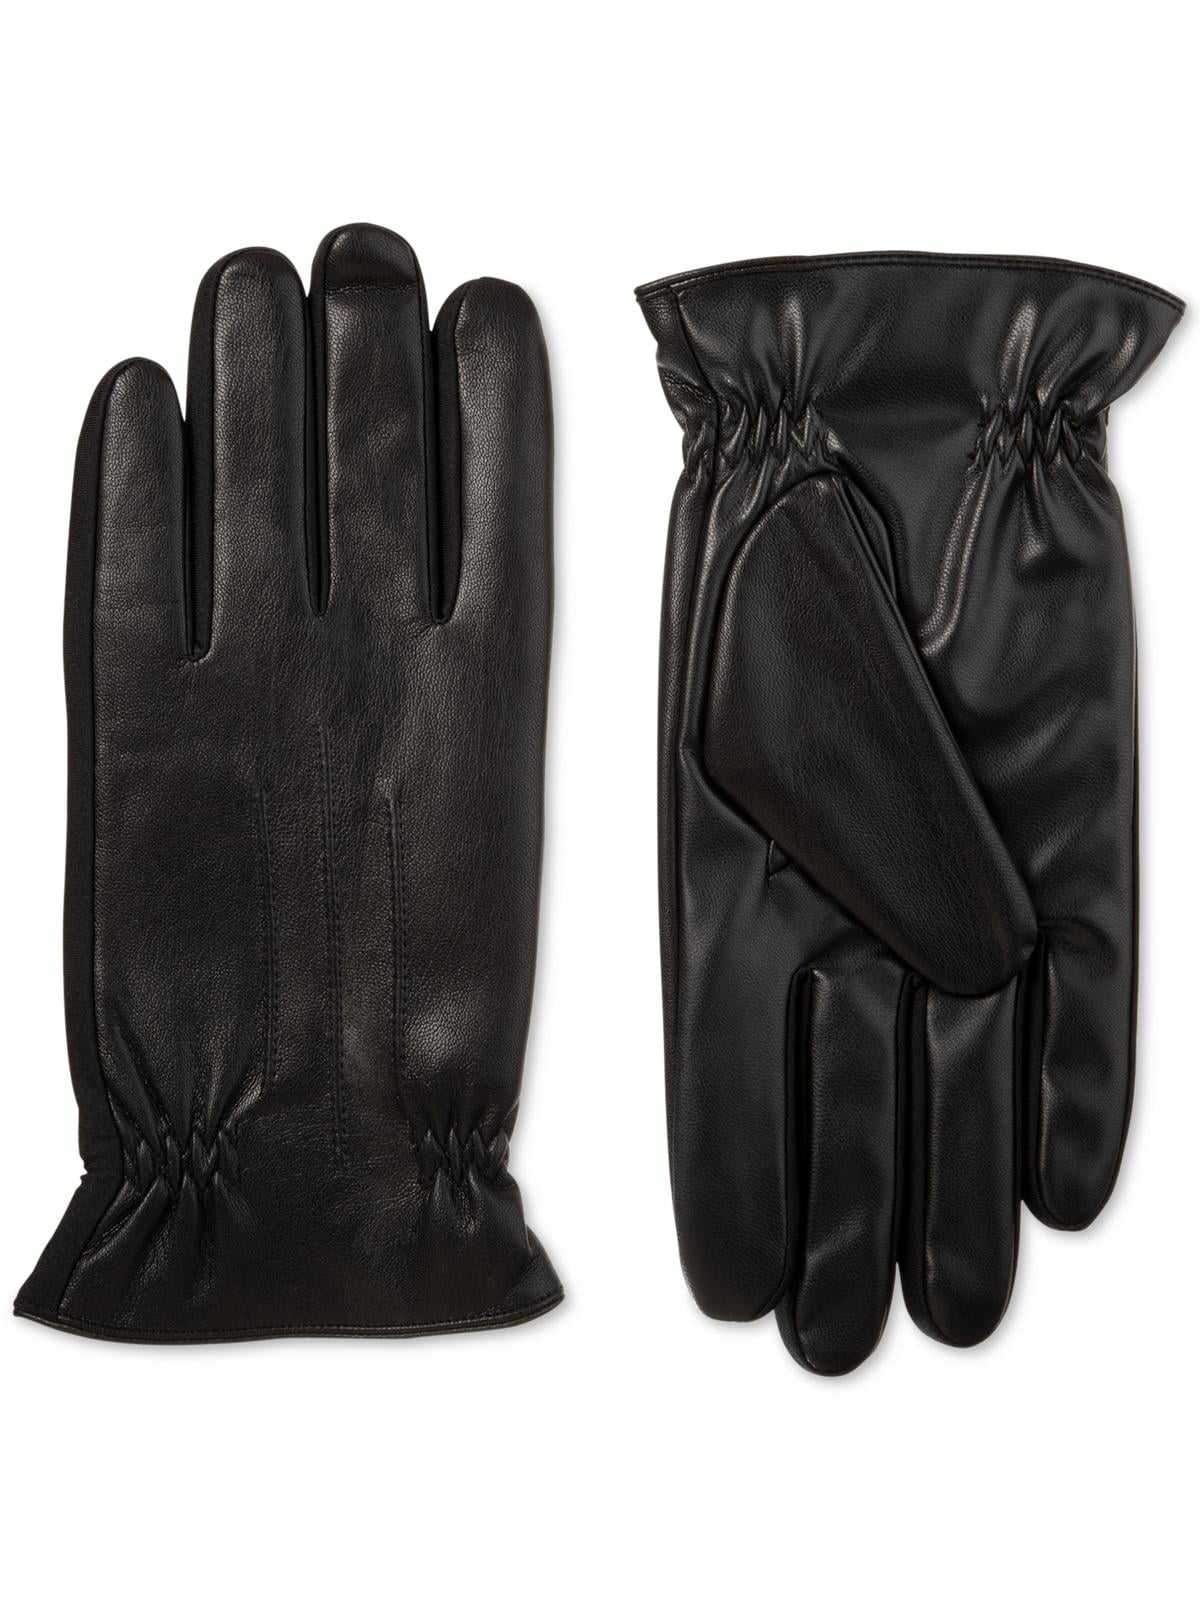 Isotoner Mens Faux Leather Fleece Lined Driving Gloves Black M ...